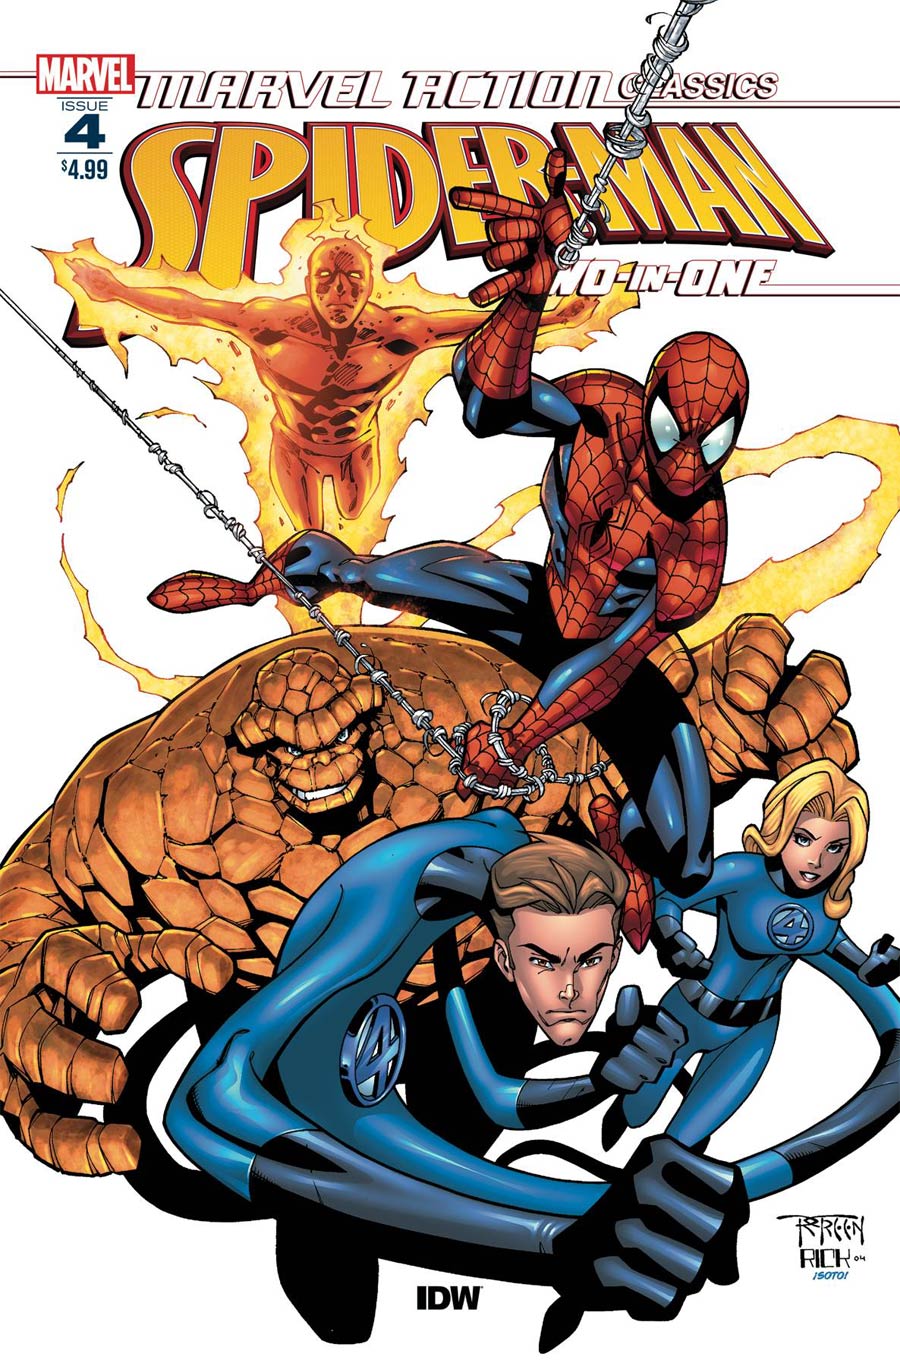 Marvel Action Classics Spider-Man Two-In-One #4